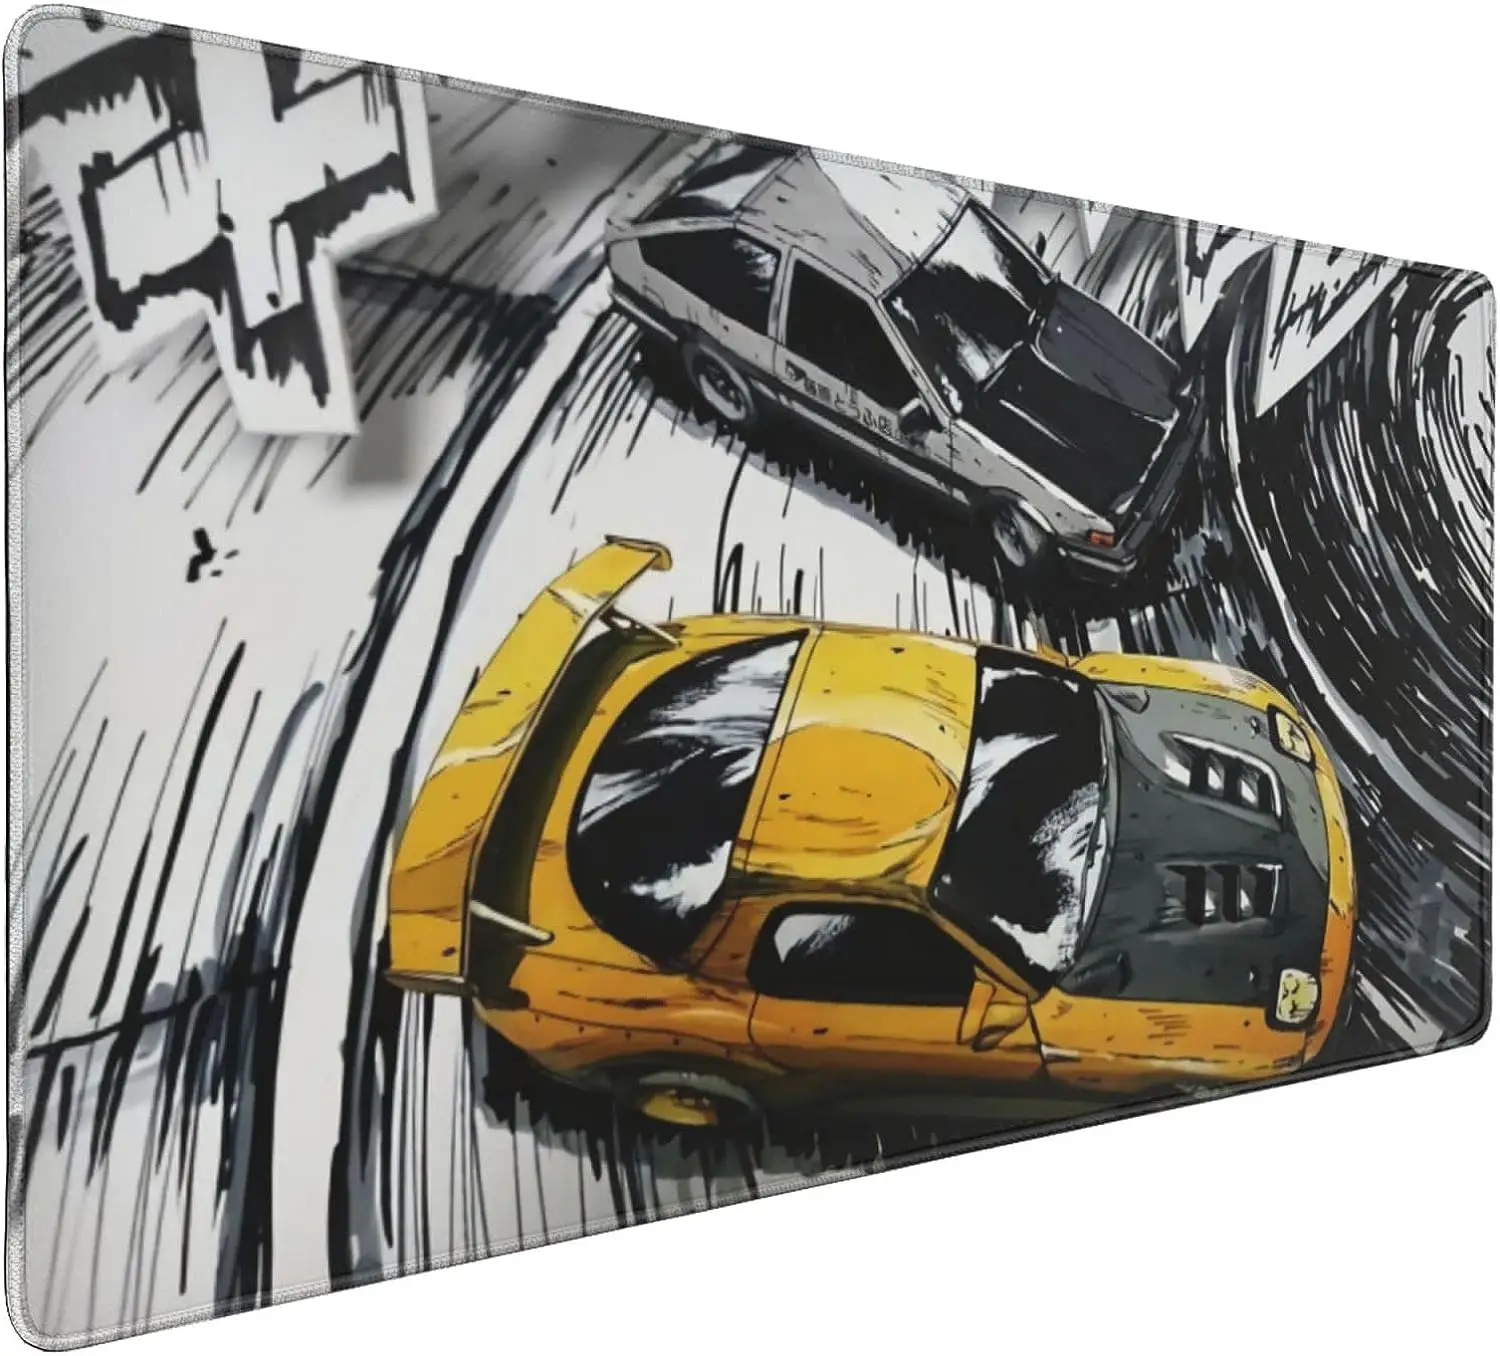 

Anime Racing Gaming Mouse Pad Non-Slip Rubber Mouse Pad with Stitched Edges Waterproof Mouse Mat for Office 35.4" x 15.7"